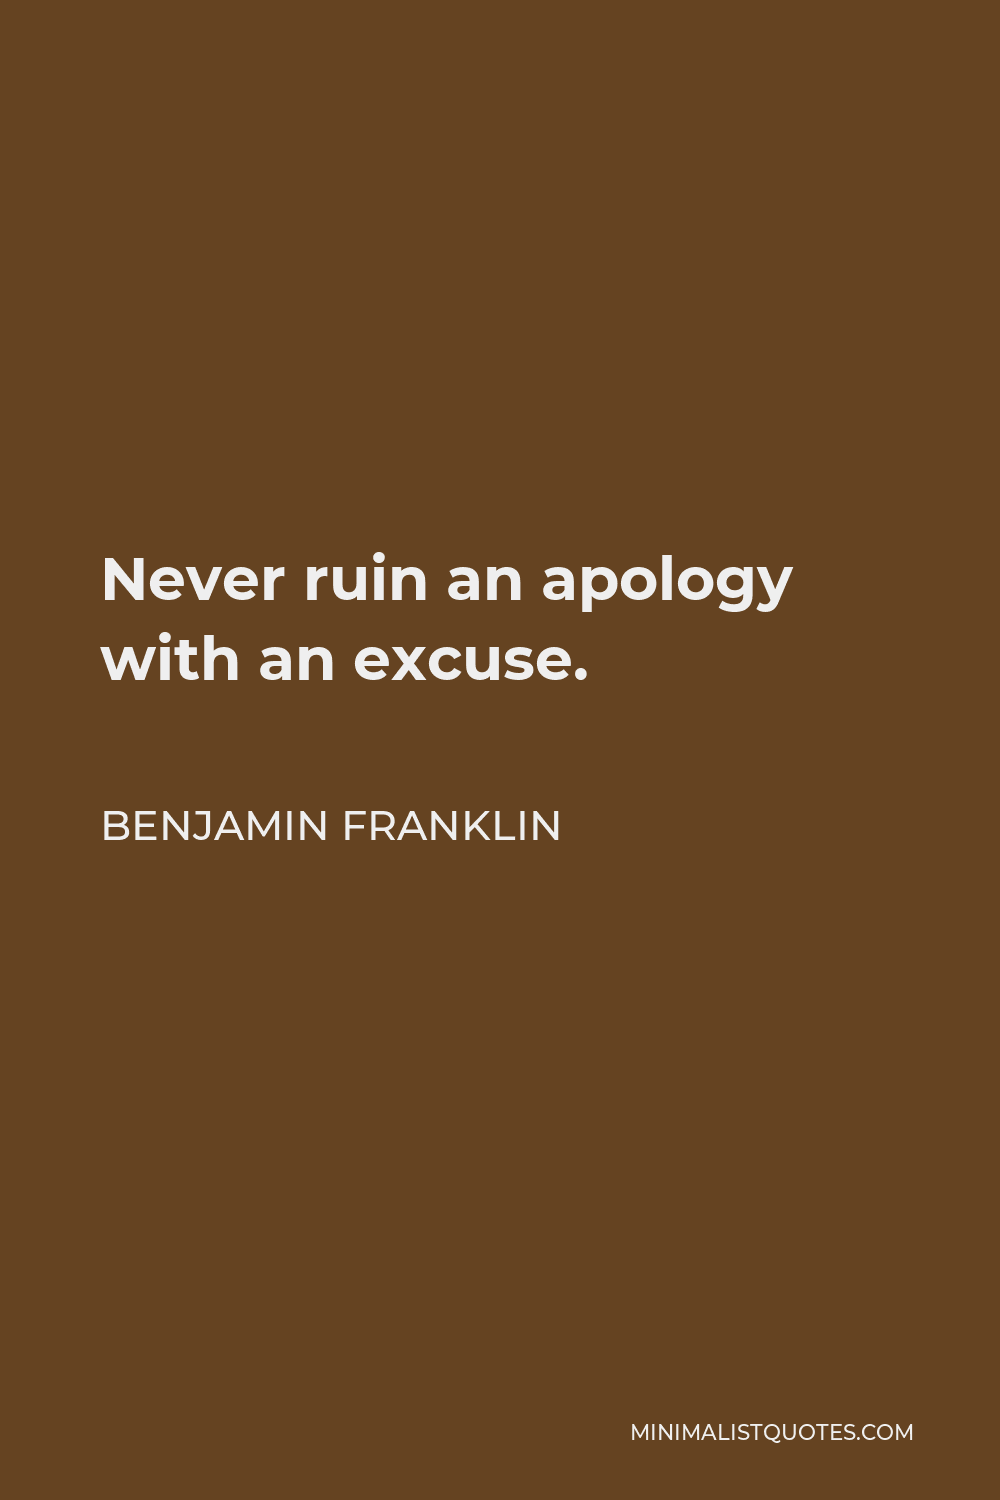 Benjamin Franklin Quote - Never ruin an apology with an excuse.